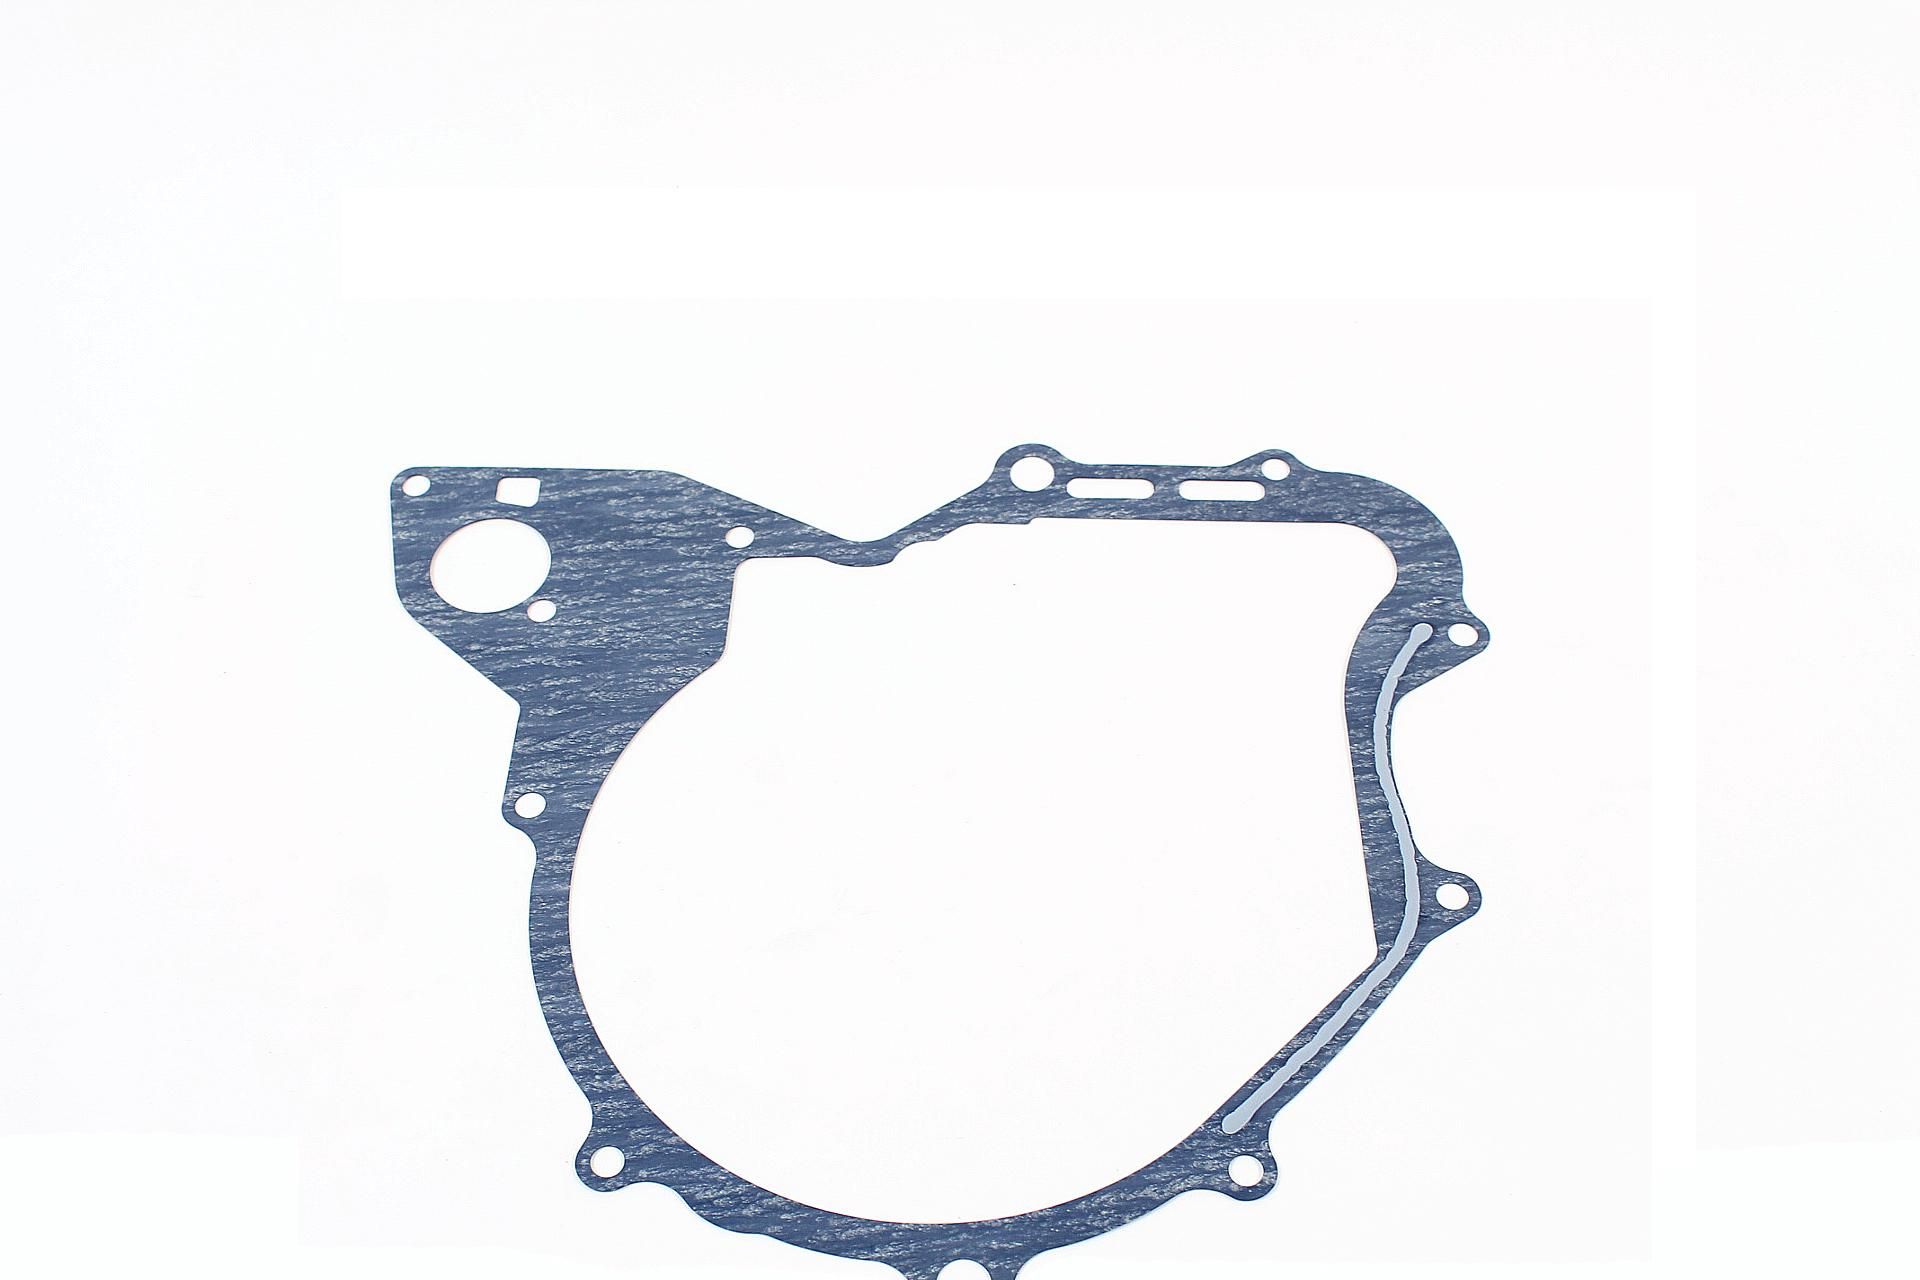 3BT-15451-00-00 Superseded by 4VR-15451-00-00 - GASKET, CRCS COVER